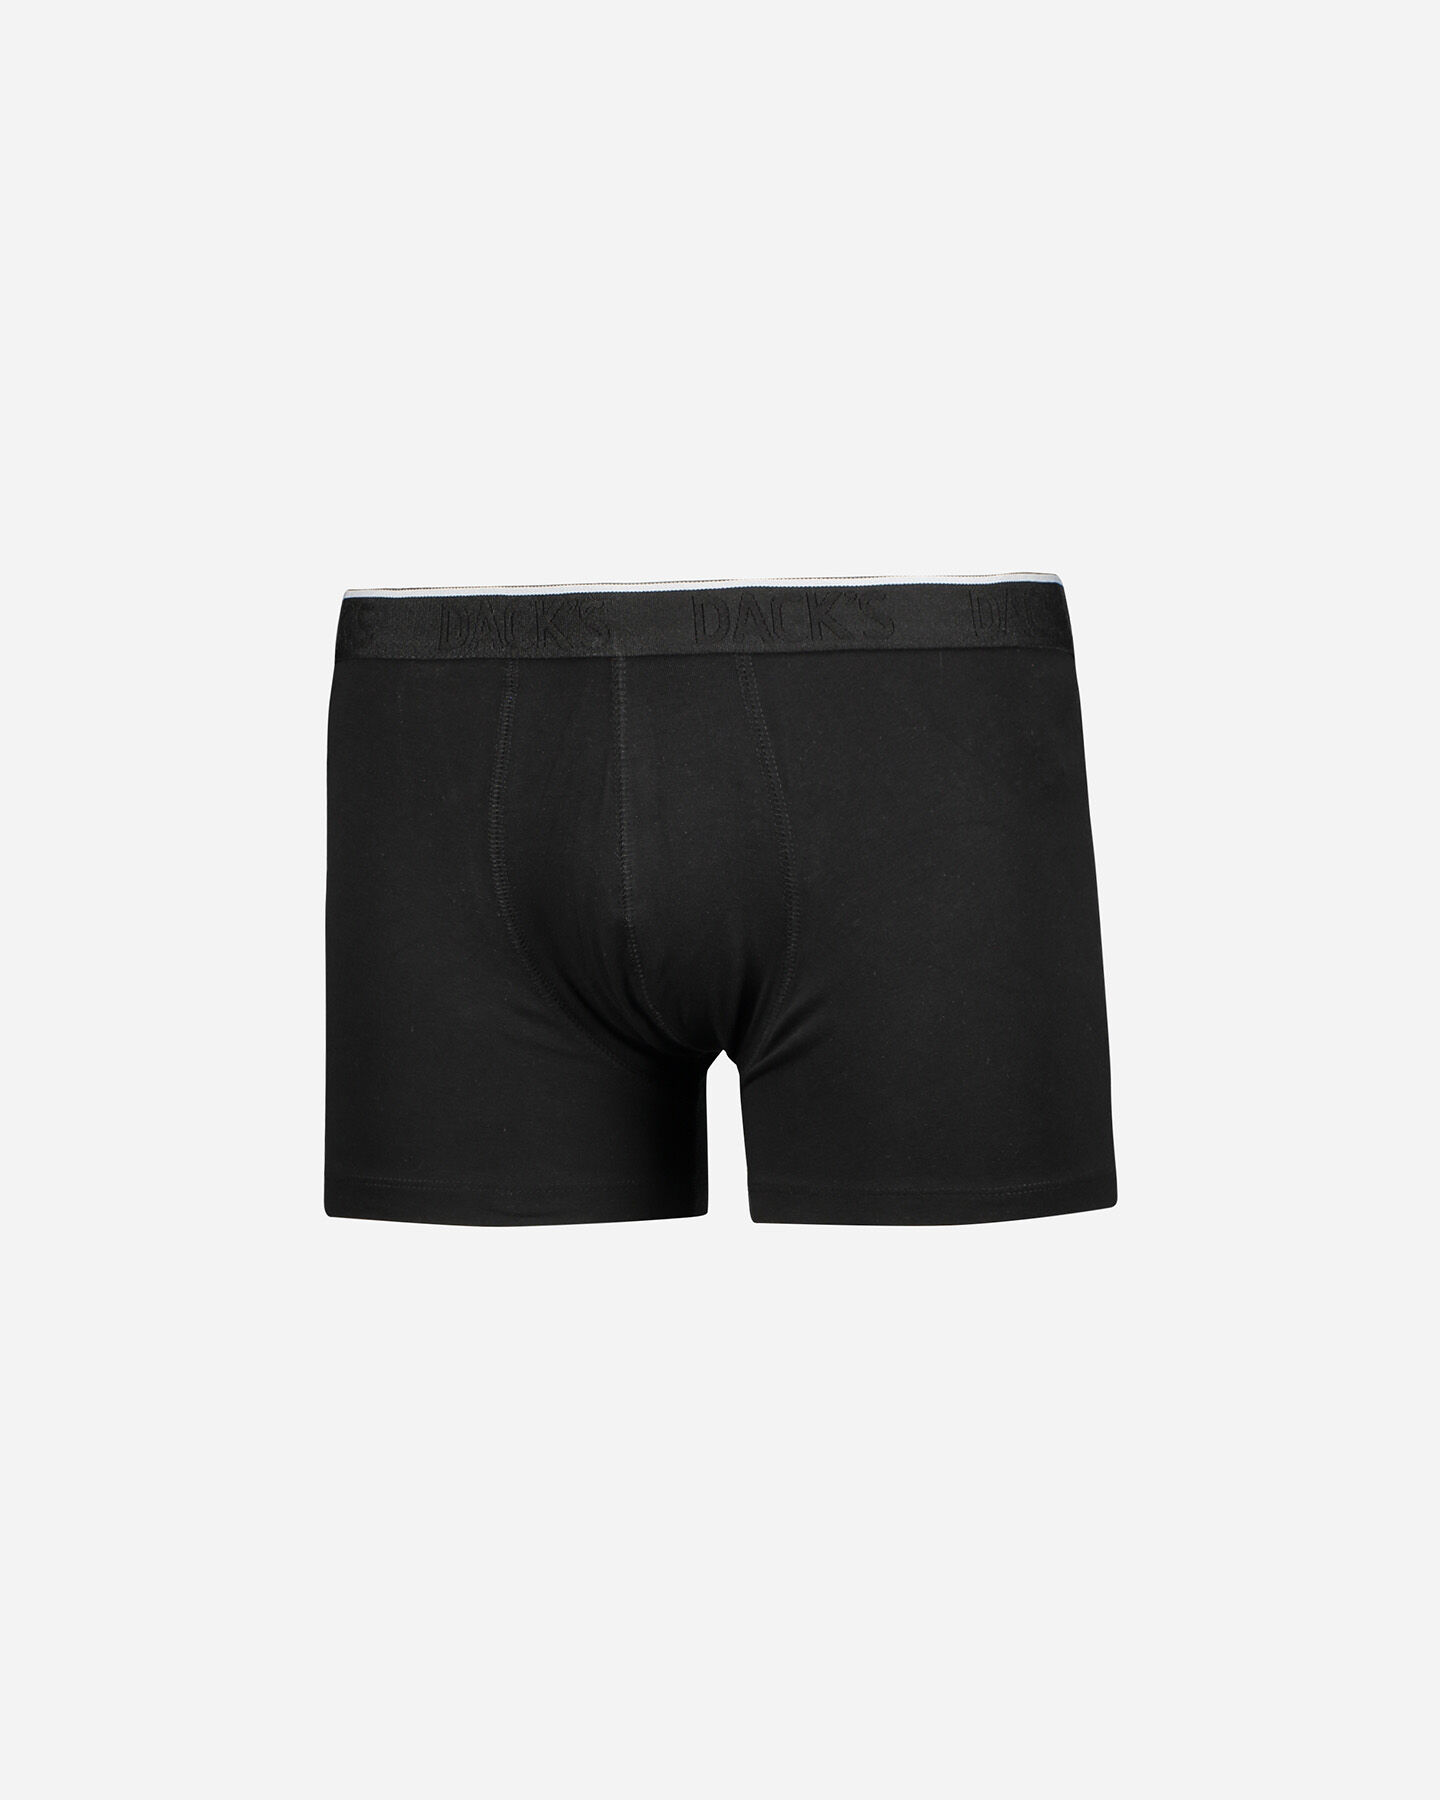  Intimo DACK'S BIPACK BASIC BOXER M S4061962|050/001|S scatto 2